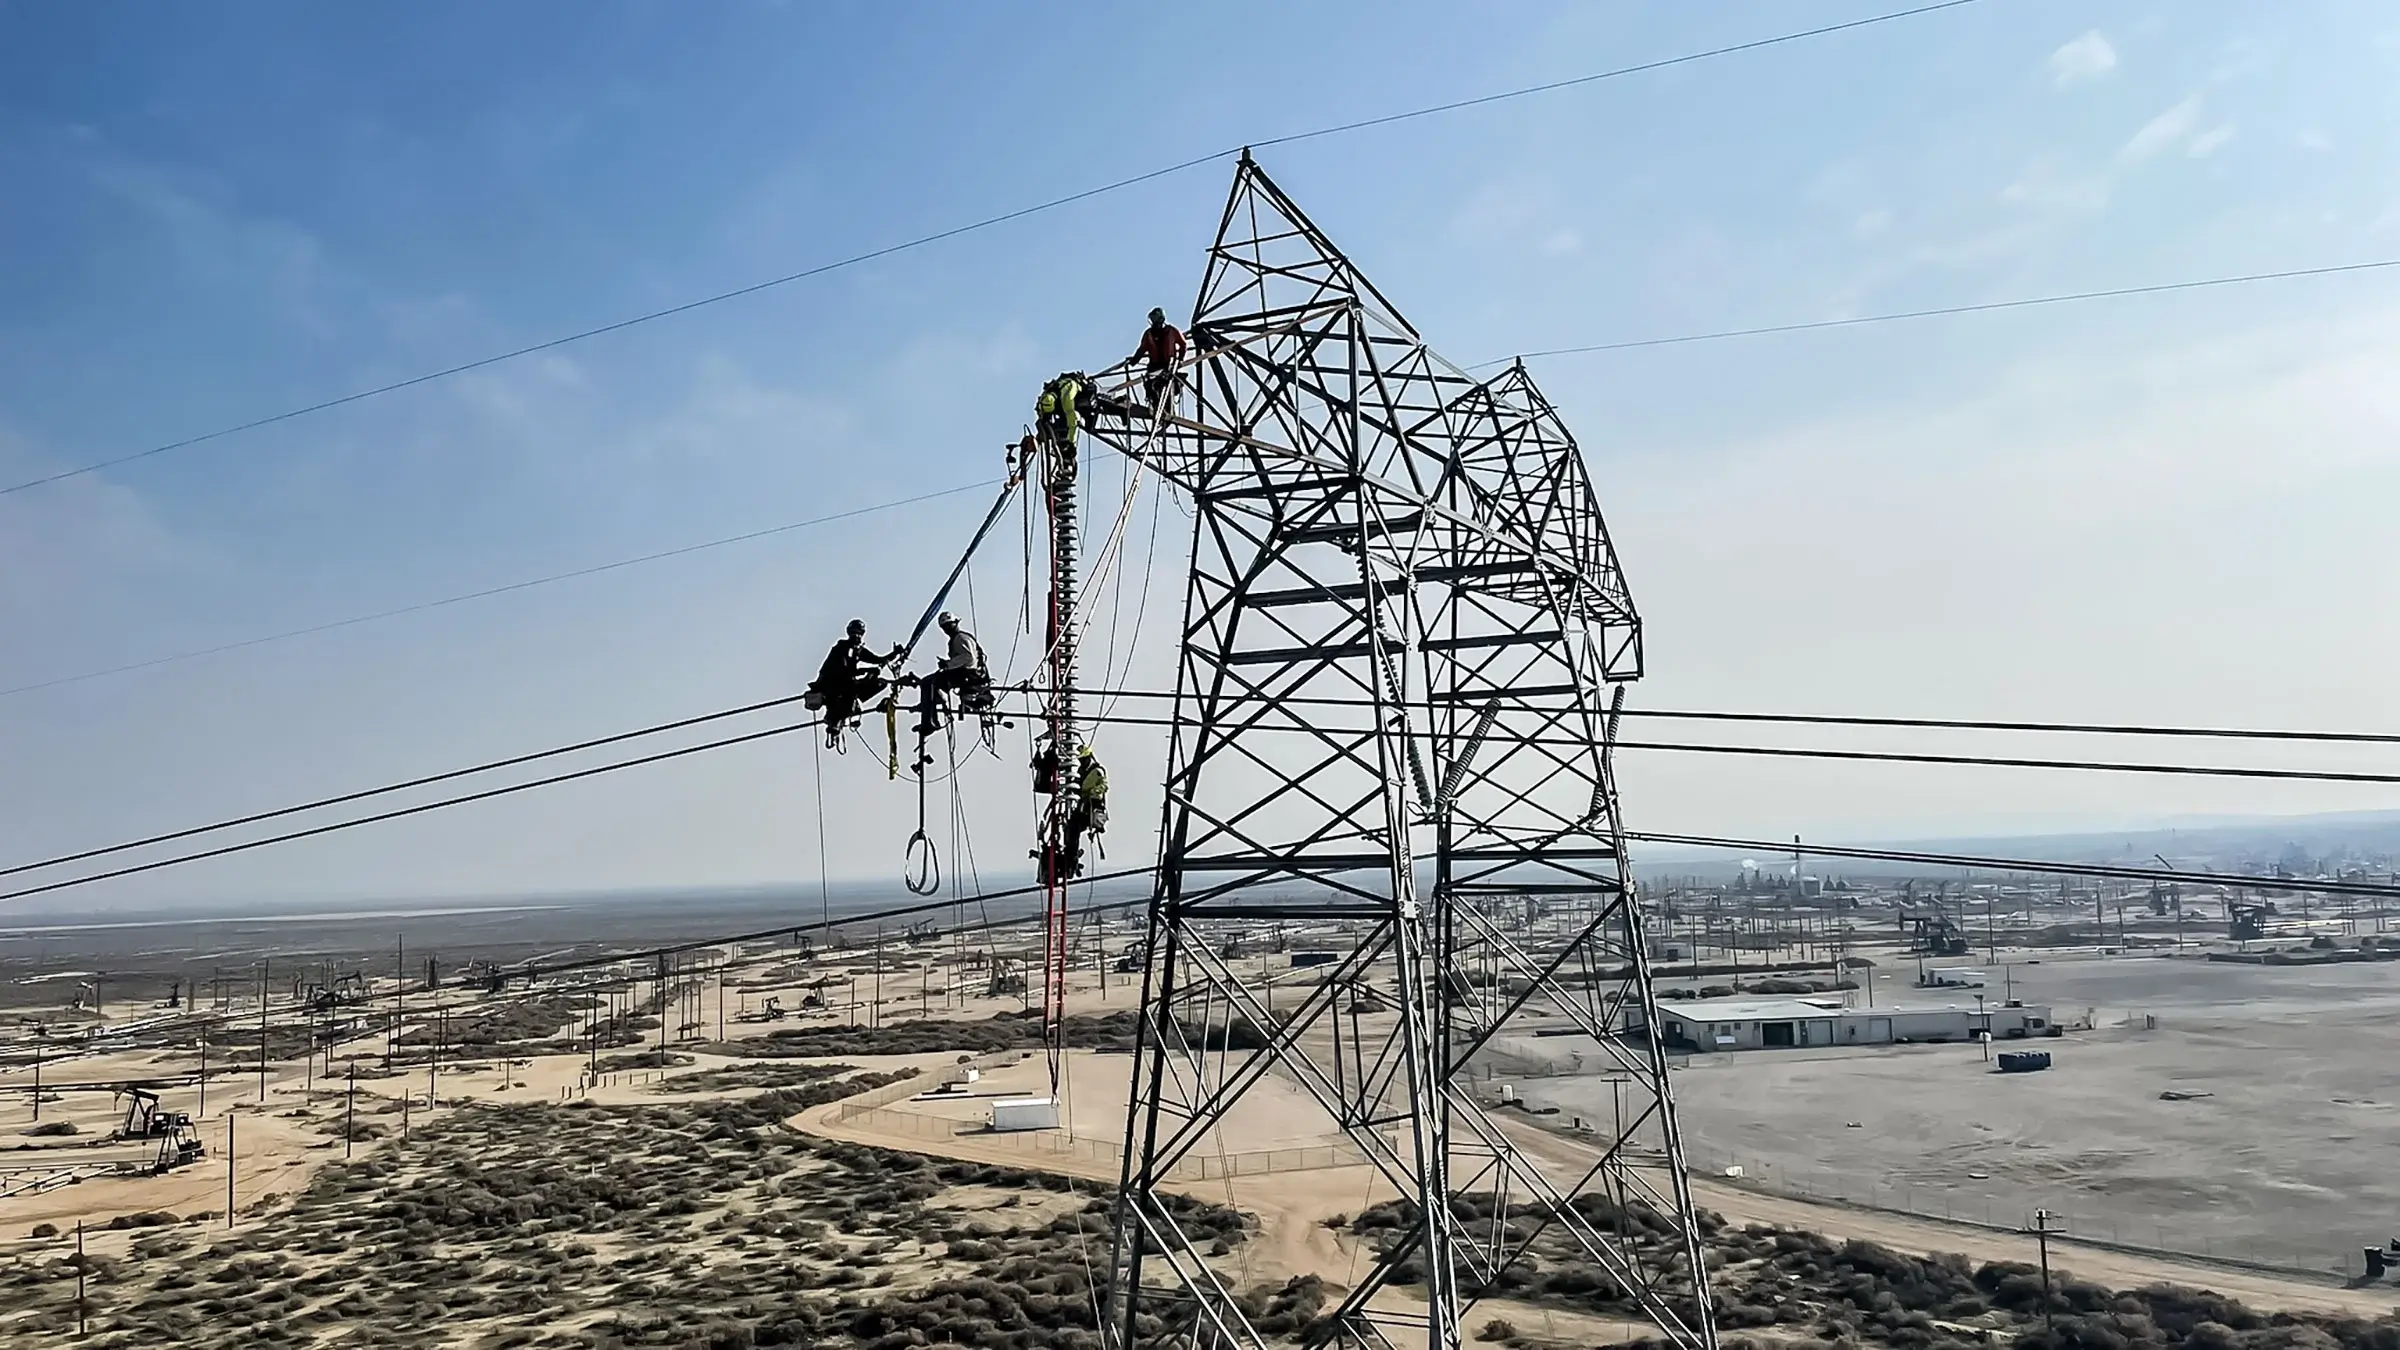 A Michels Pacific Energy crew operates at the top of a power line structure